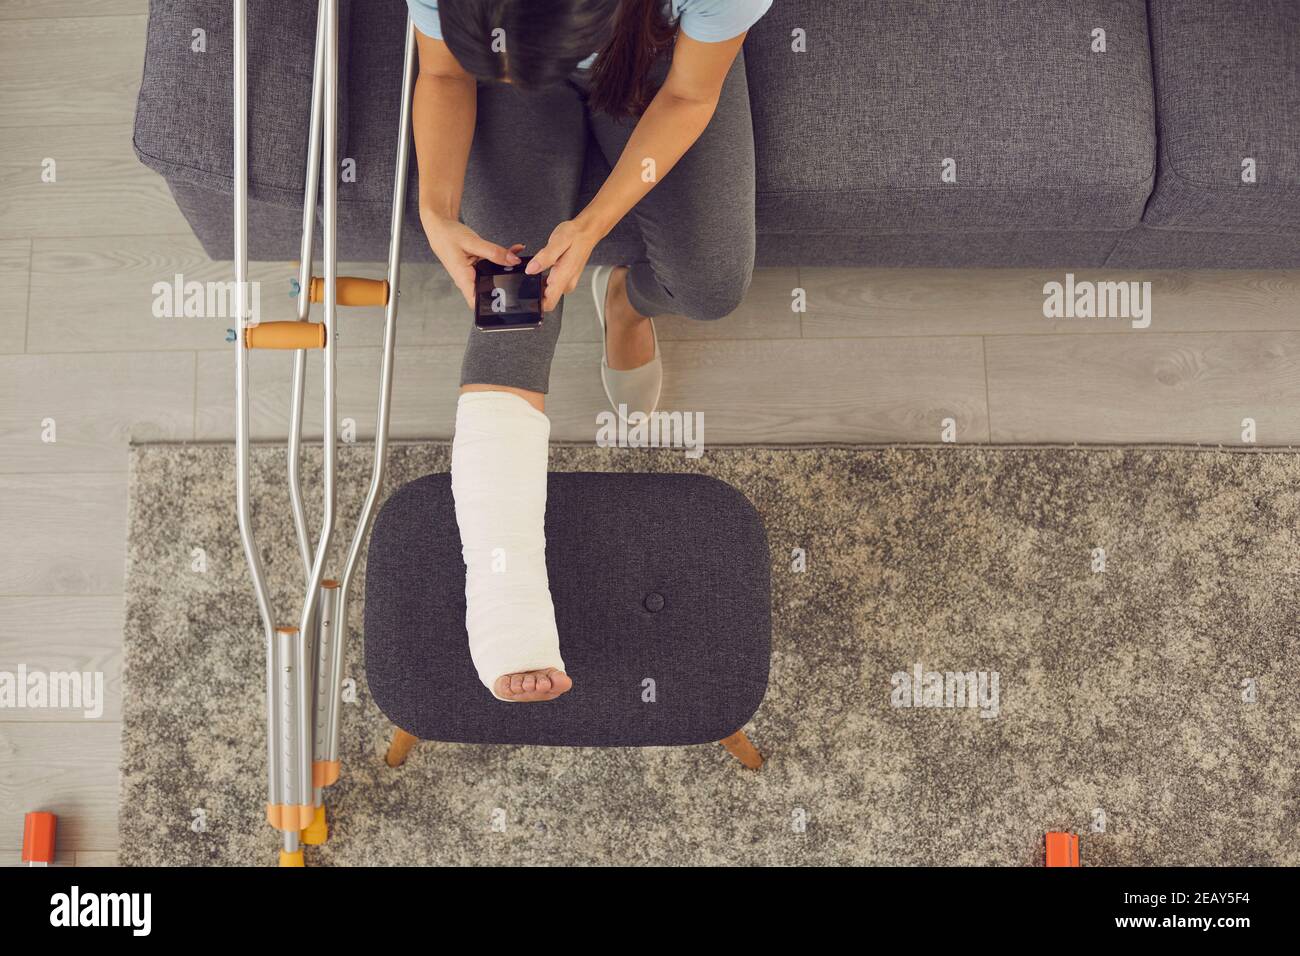 Woman photographing her leg in a plaster cast for an online consultation with a doctor. Stock Photo